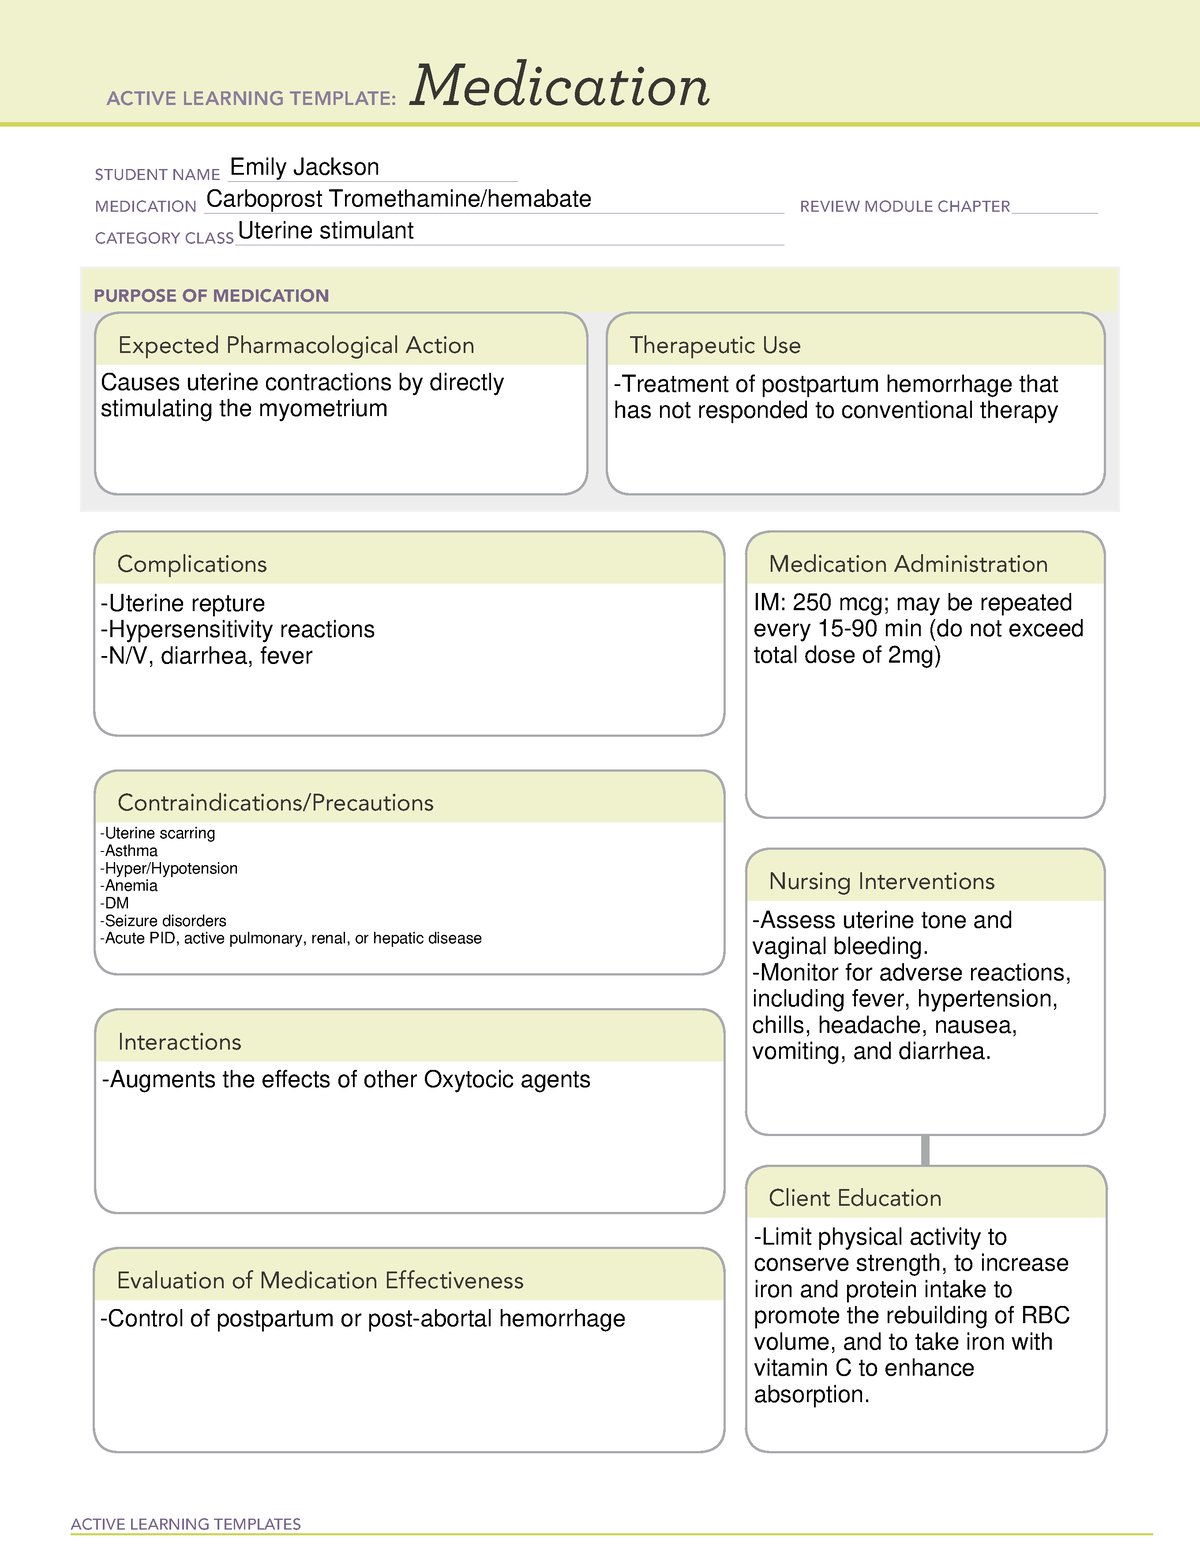 Carboprost Active learning template ACTIVE LEARNING TEMPLATES